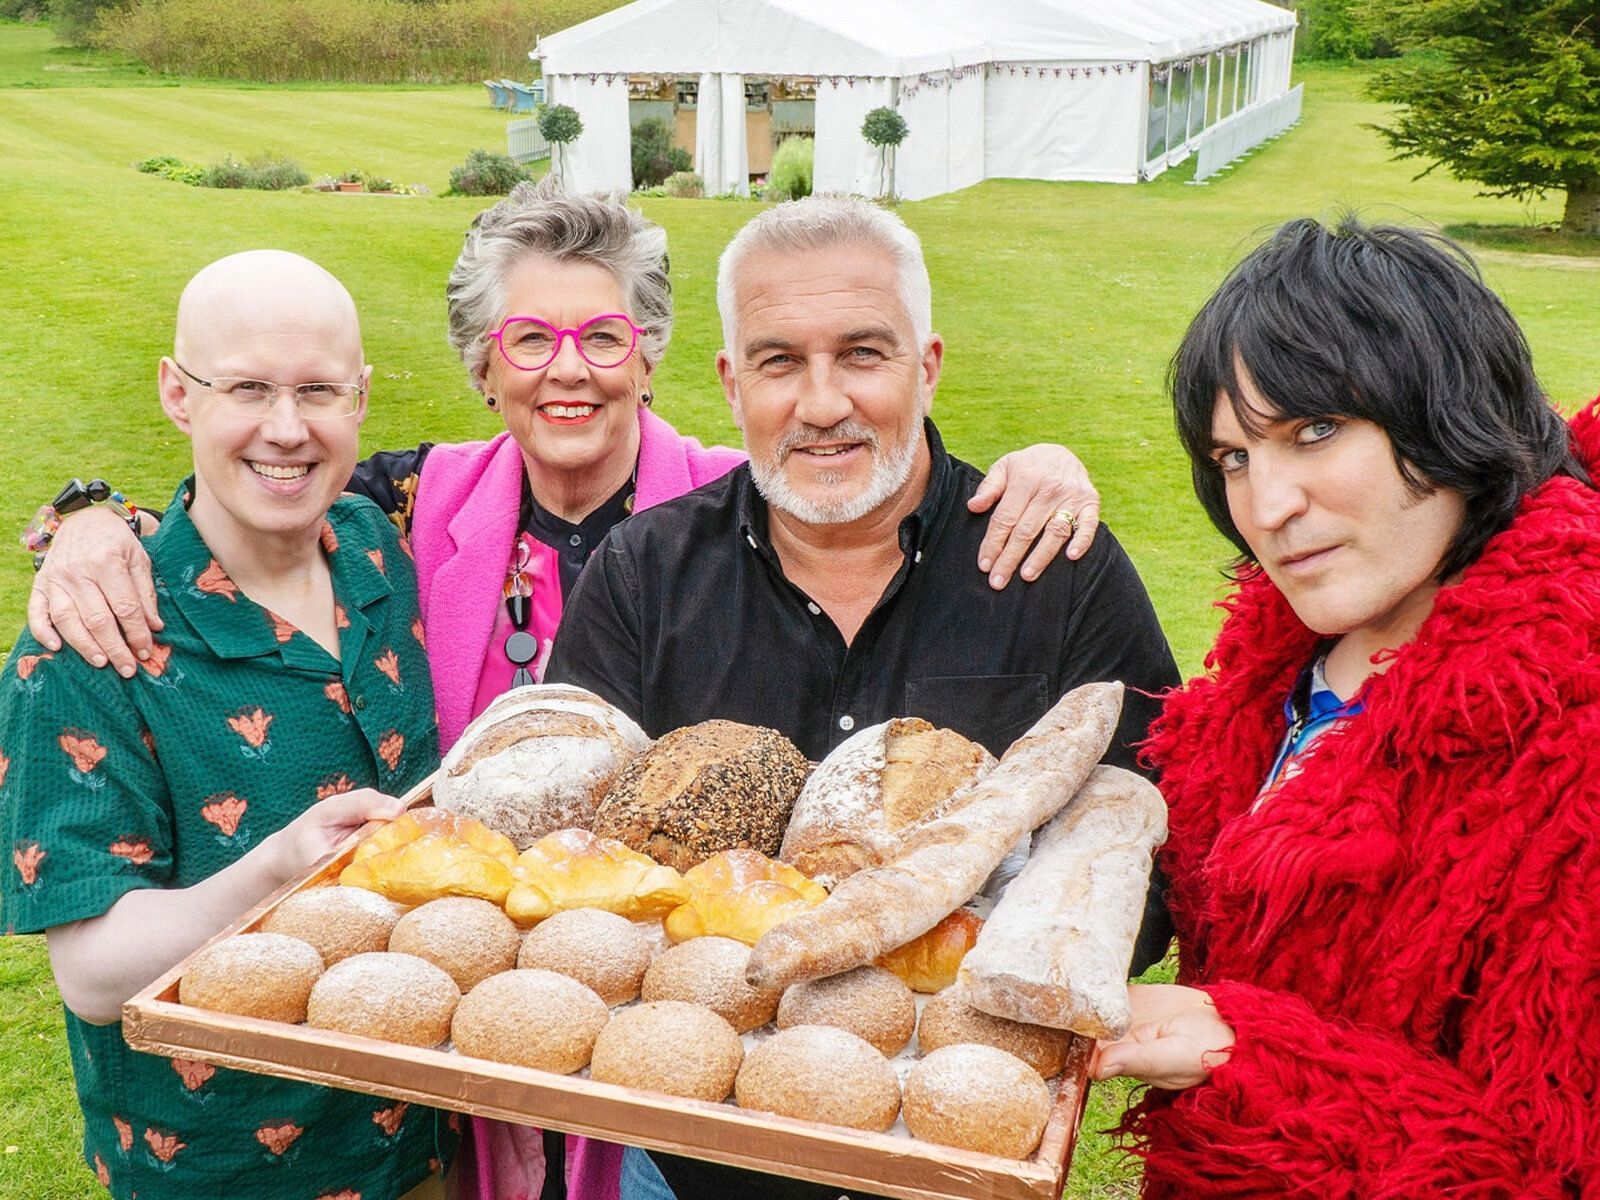 What time will The Great British Baking Show Holidays season 5